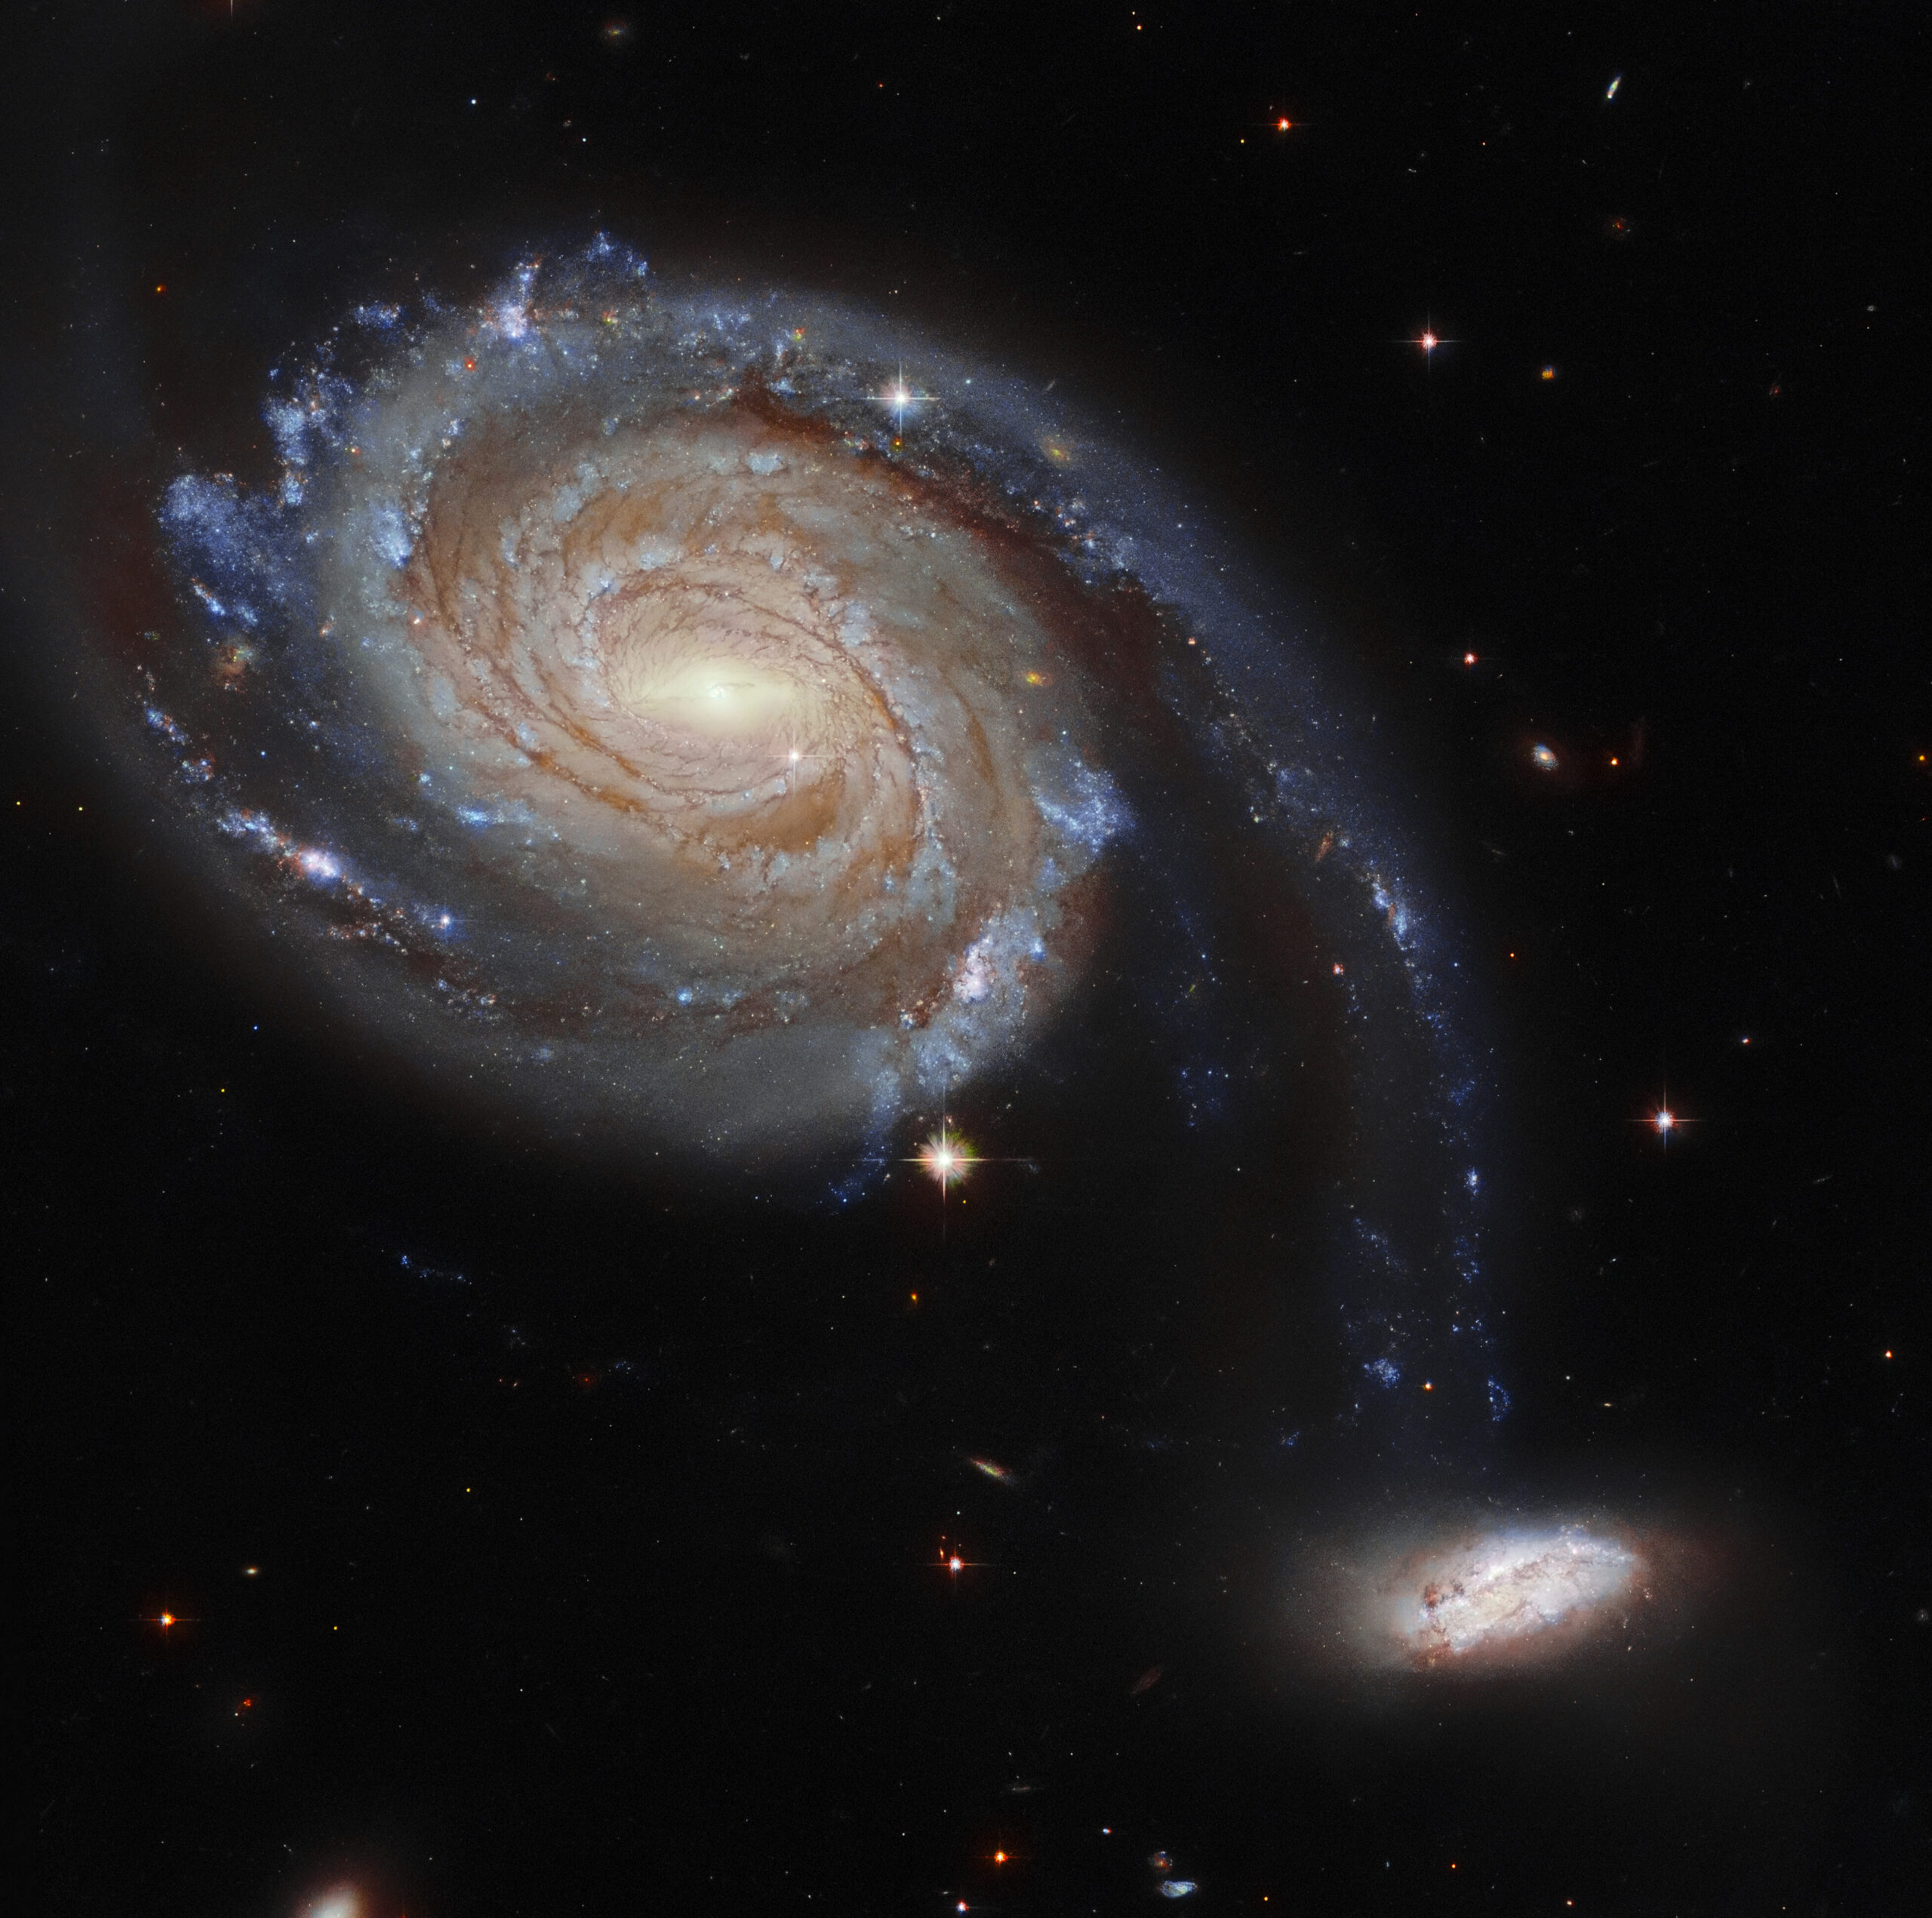 These two galaxies are locked in a cosmic battle